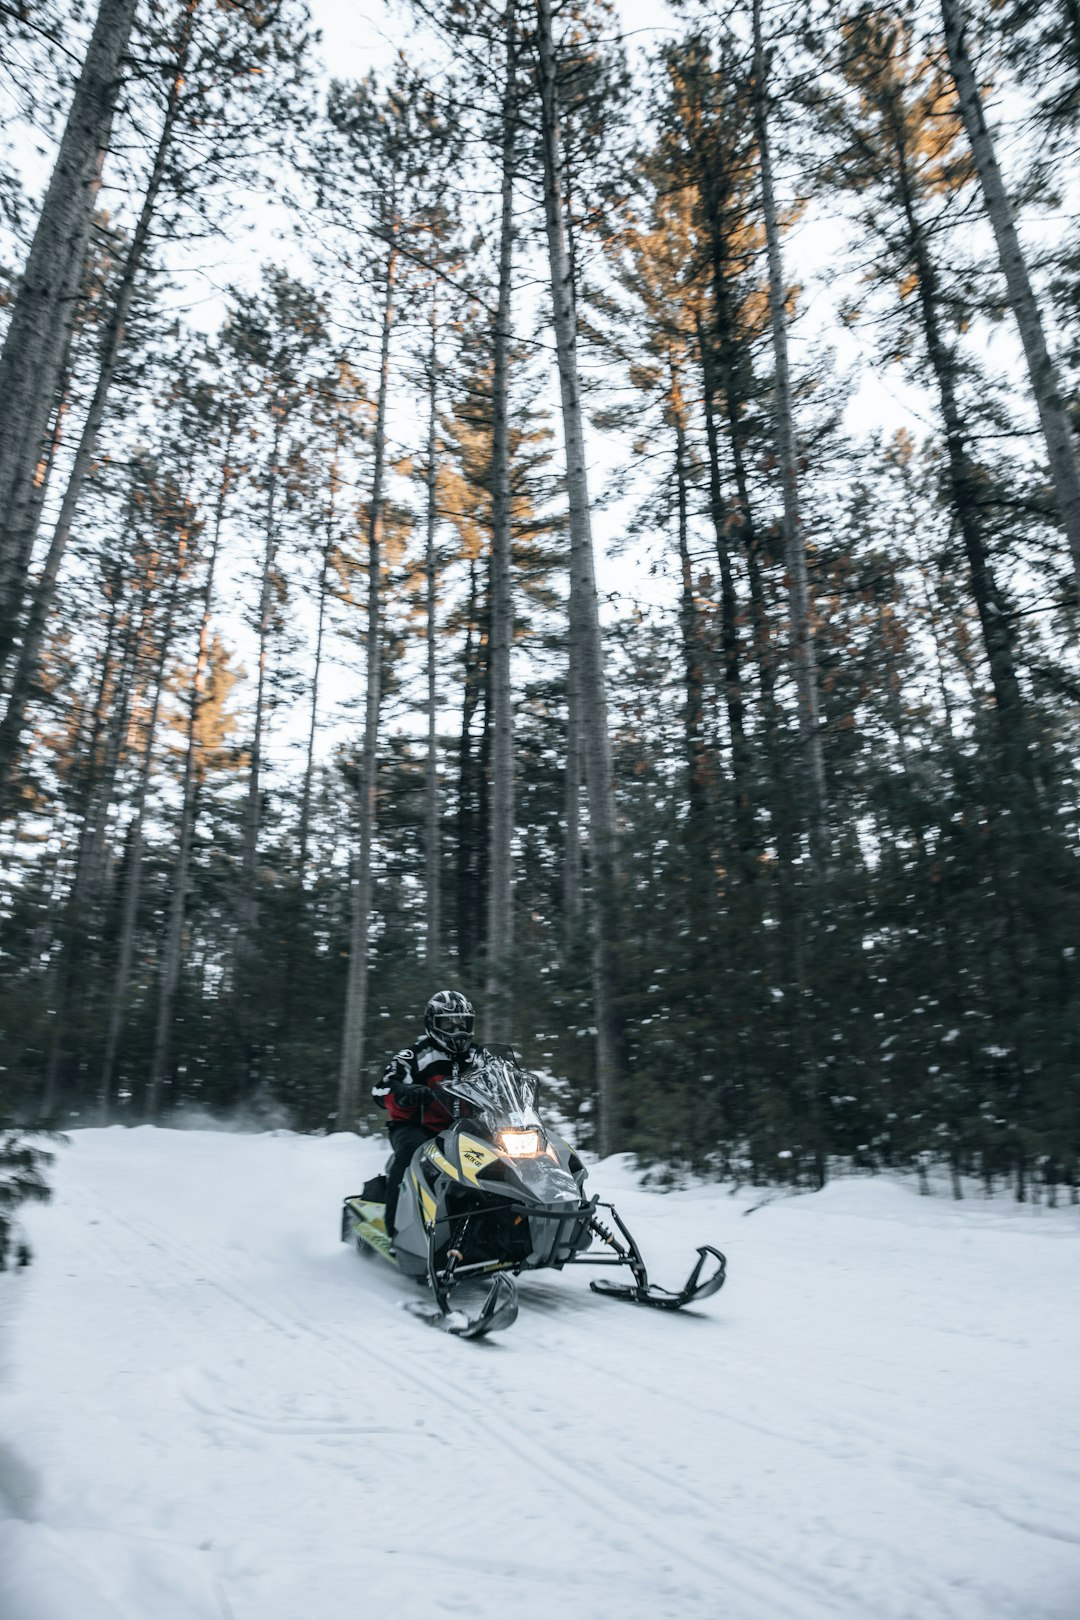 person riding on black motorcycle on snow covered ground near trees during daytime